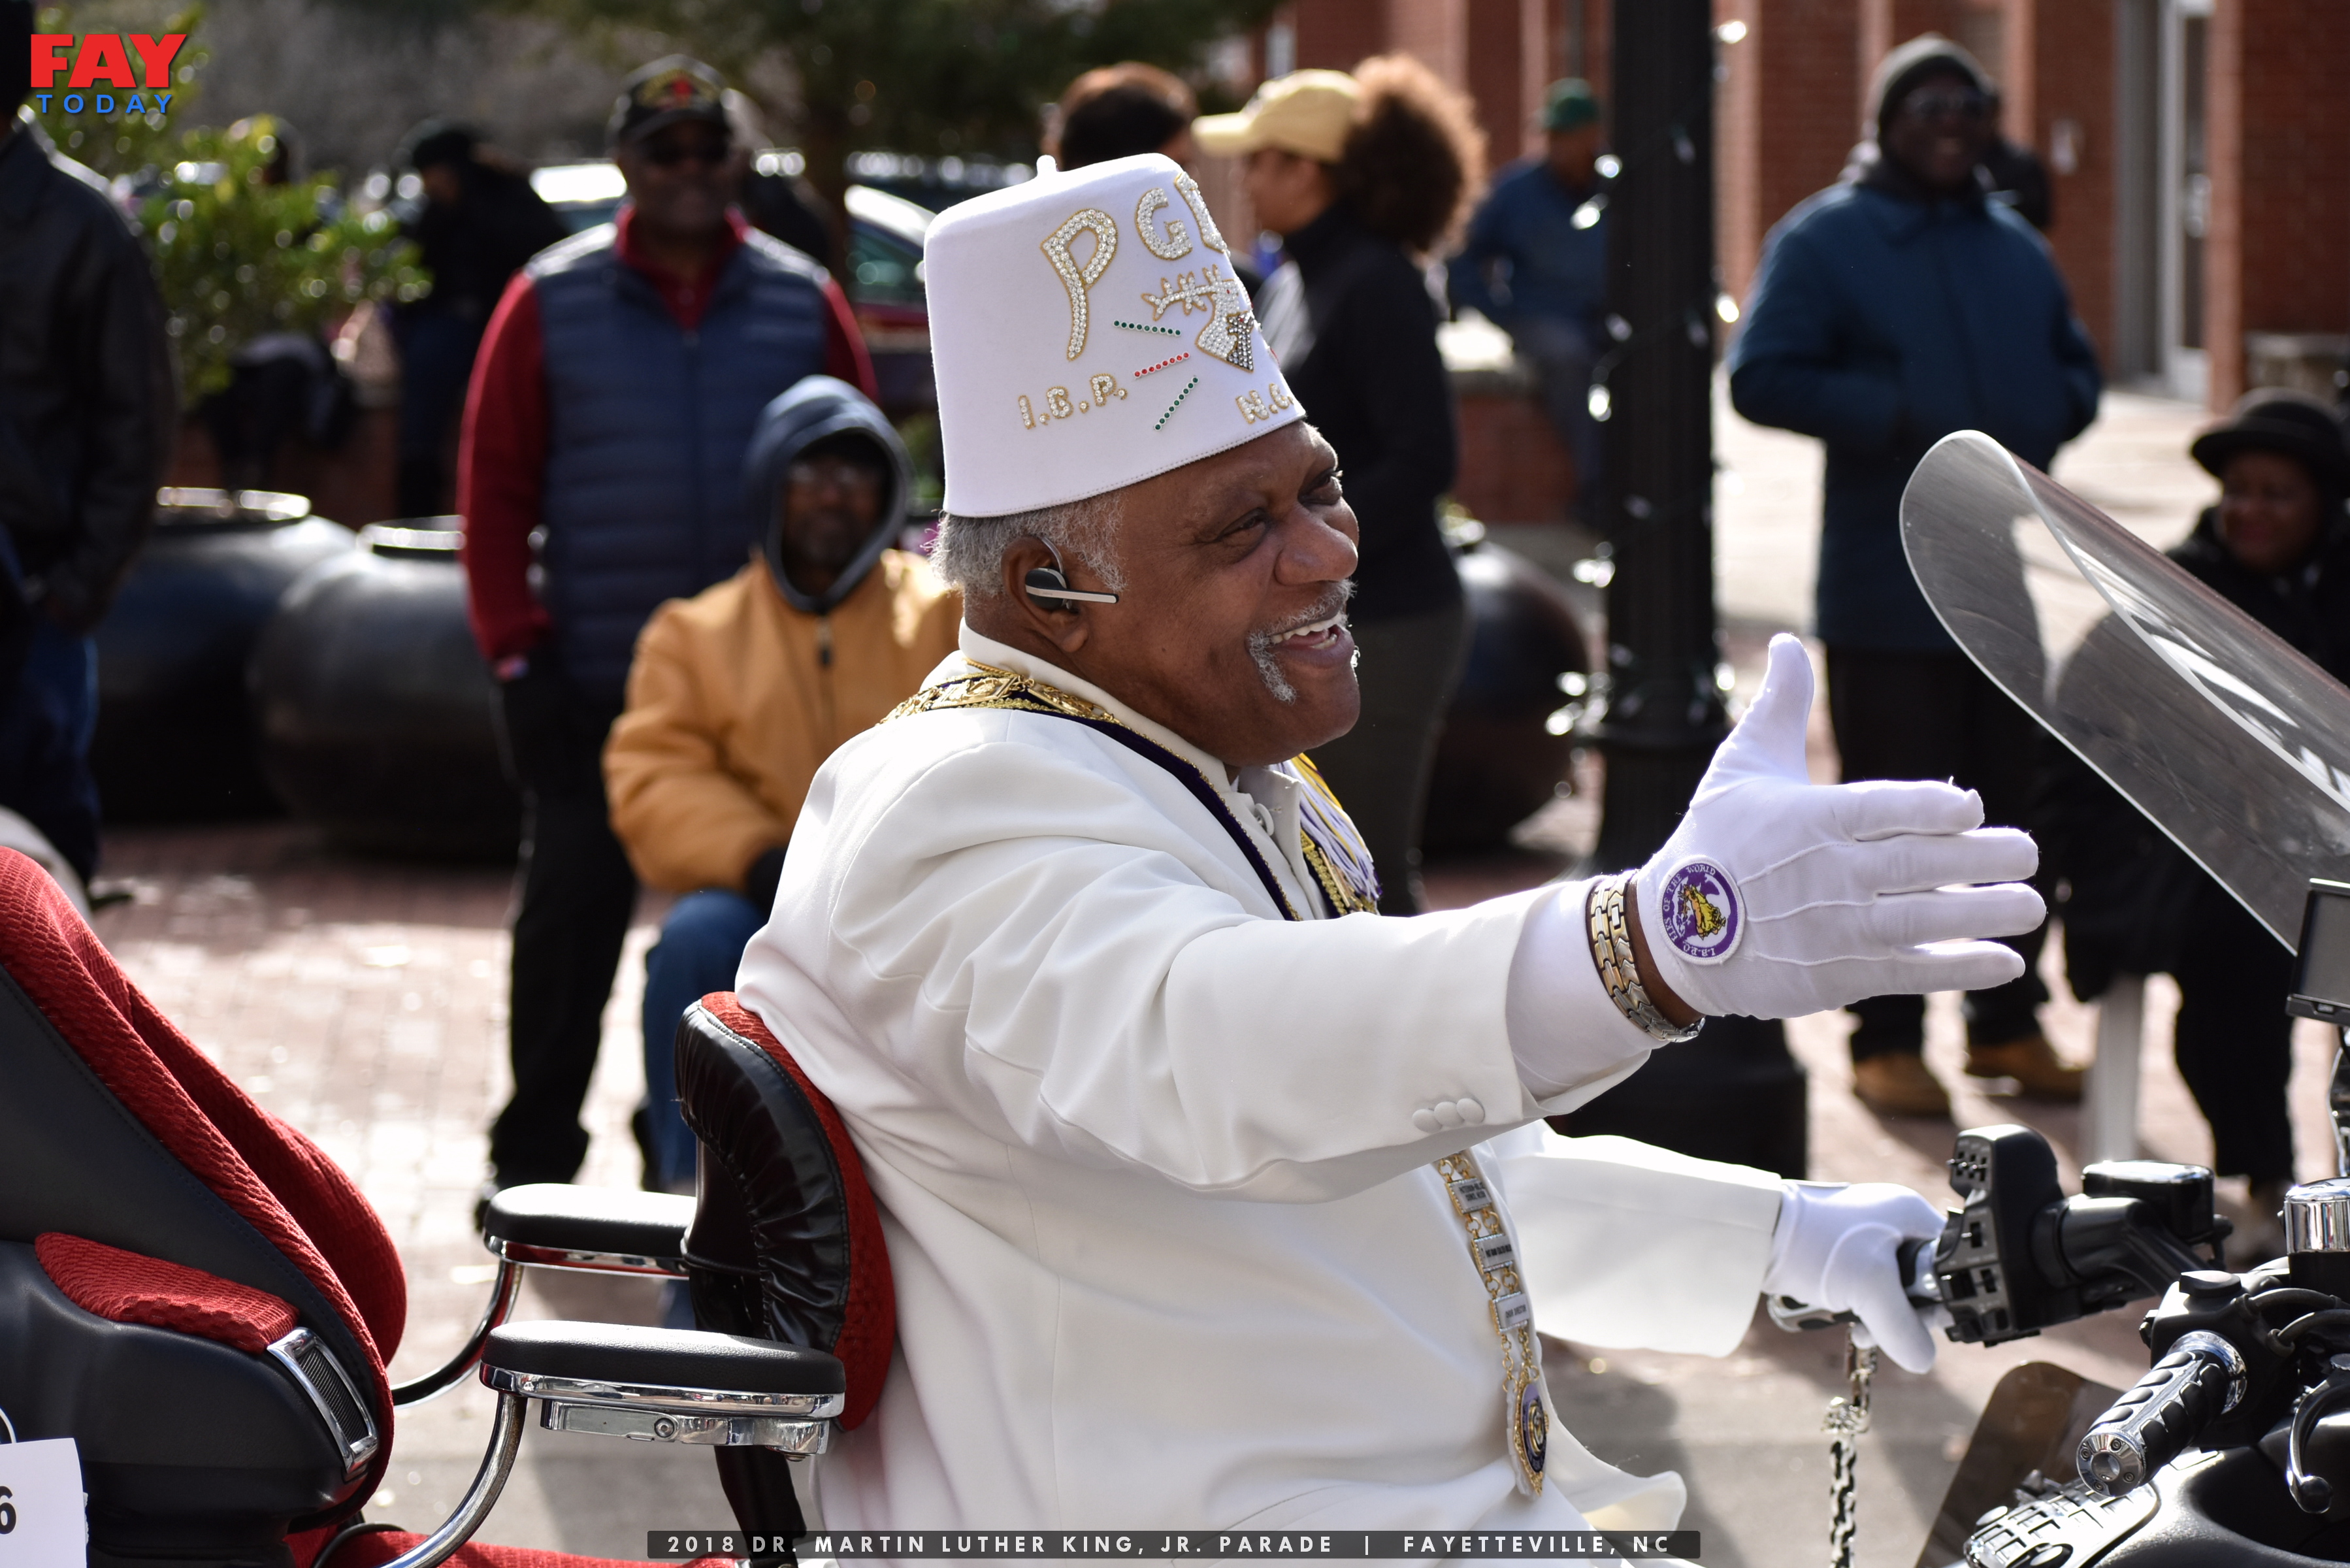 2018 Martin Luther King Parade in Fayetteville NC FayToday News